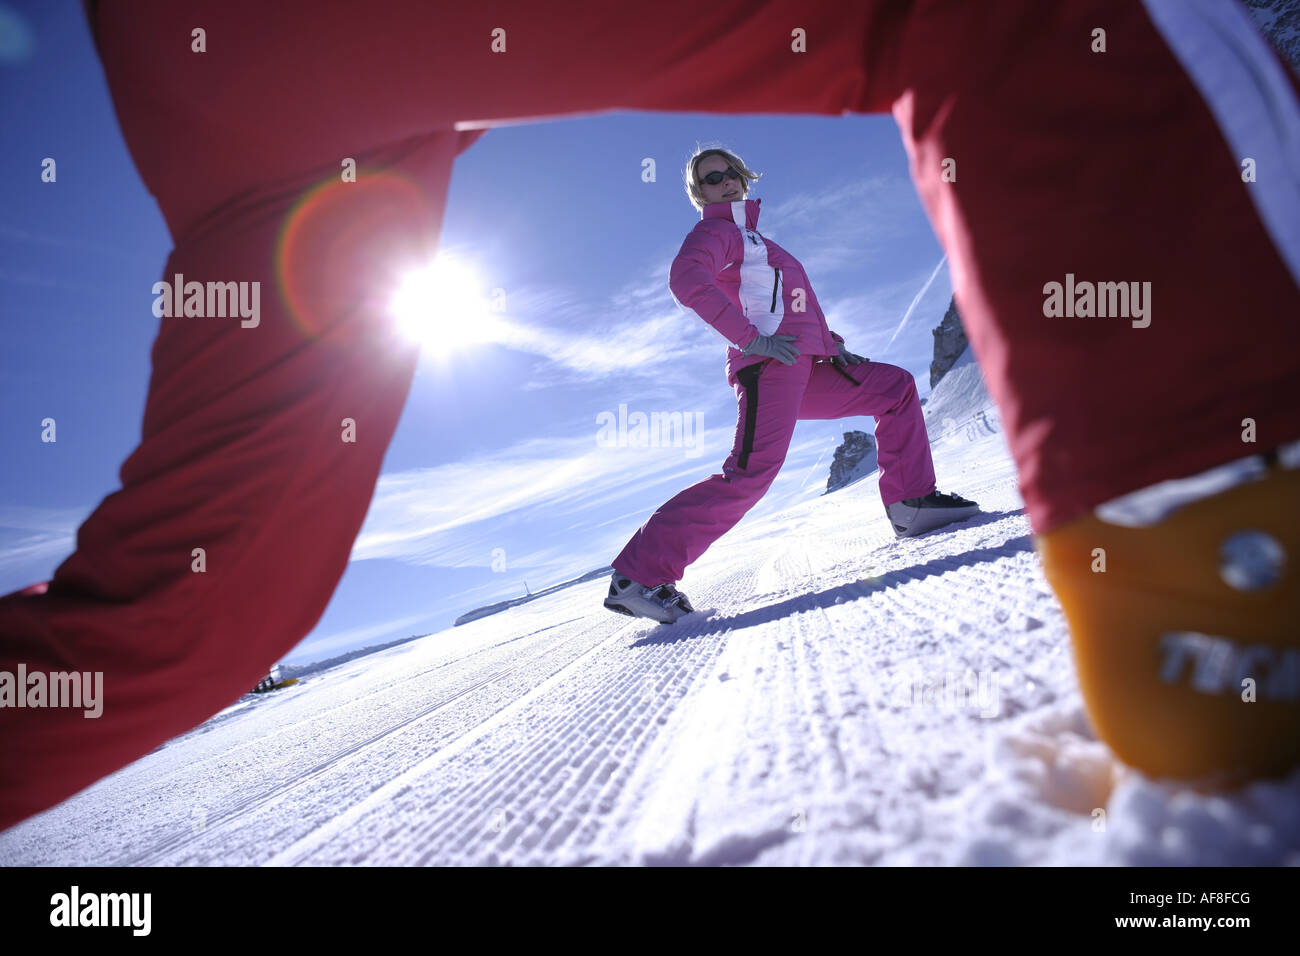 A woman having skiing lesson with a ski instructor, Hintertux Glacier, Tyrol, Austria Stock Photo